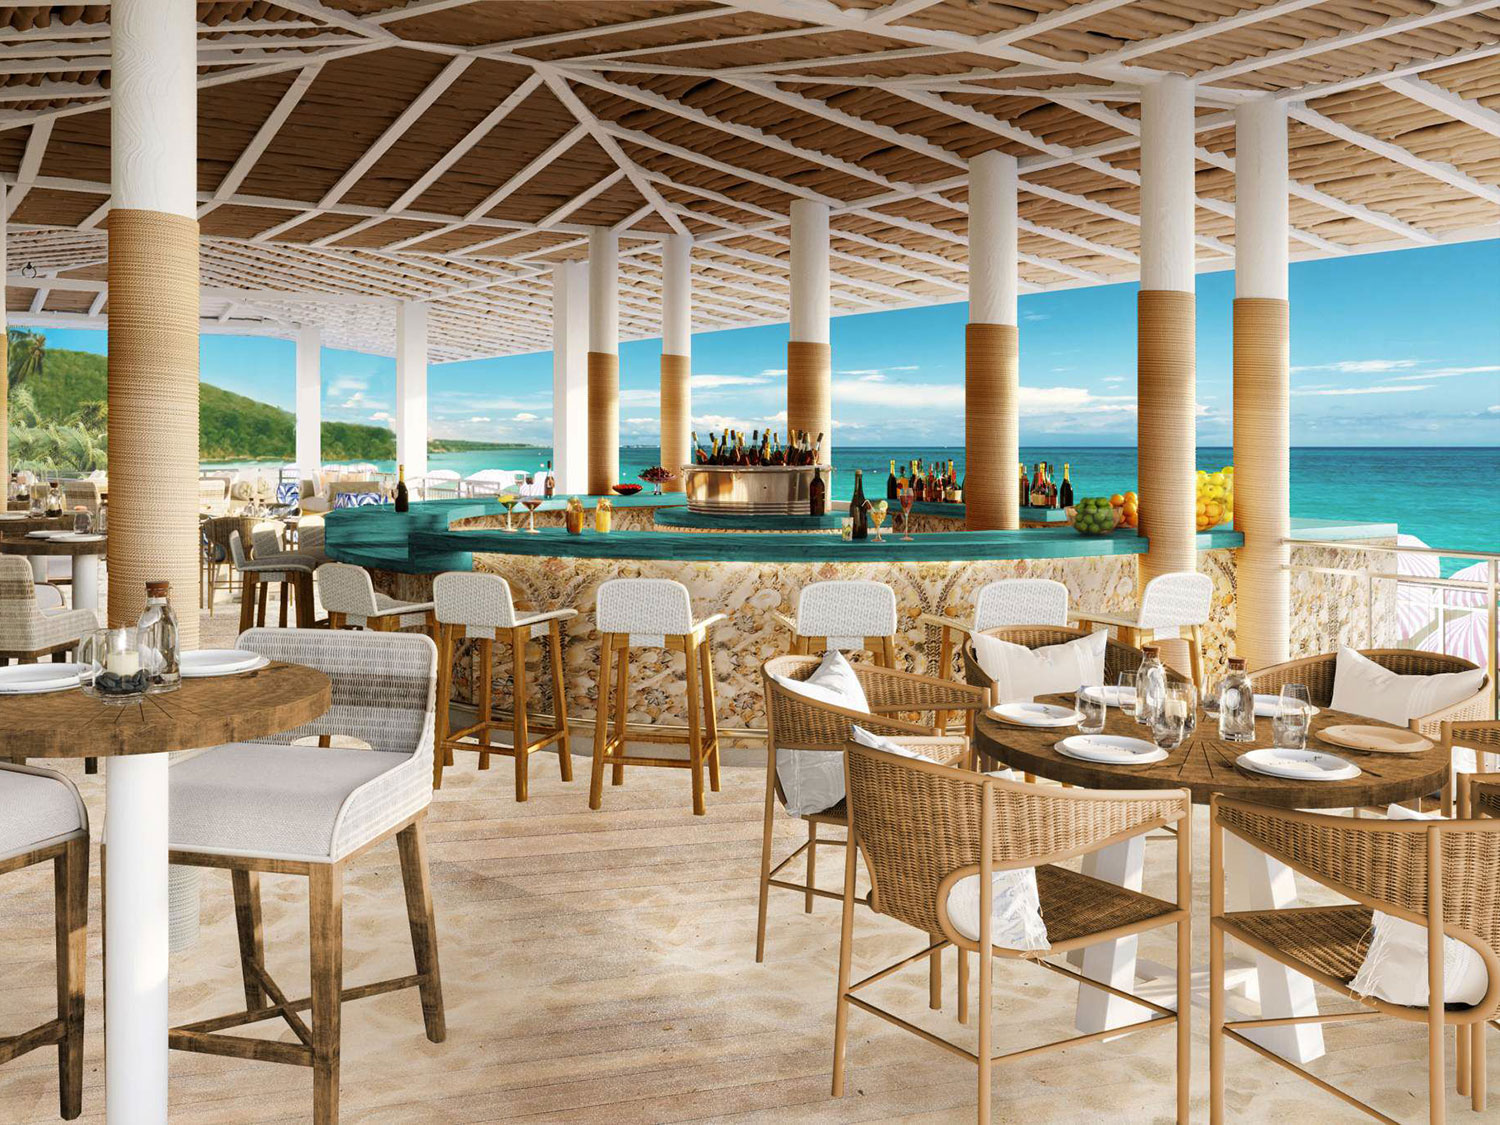 A rendering of the Salt Shack restaurant at Frenchman's Reef in St. Thomas, U.S. Virgin Islands.